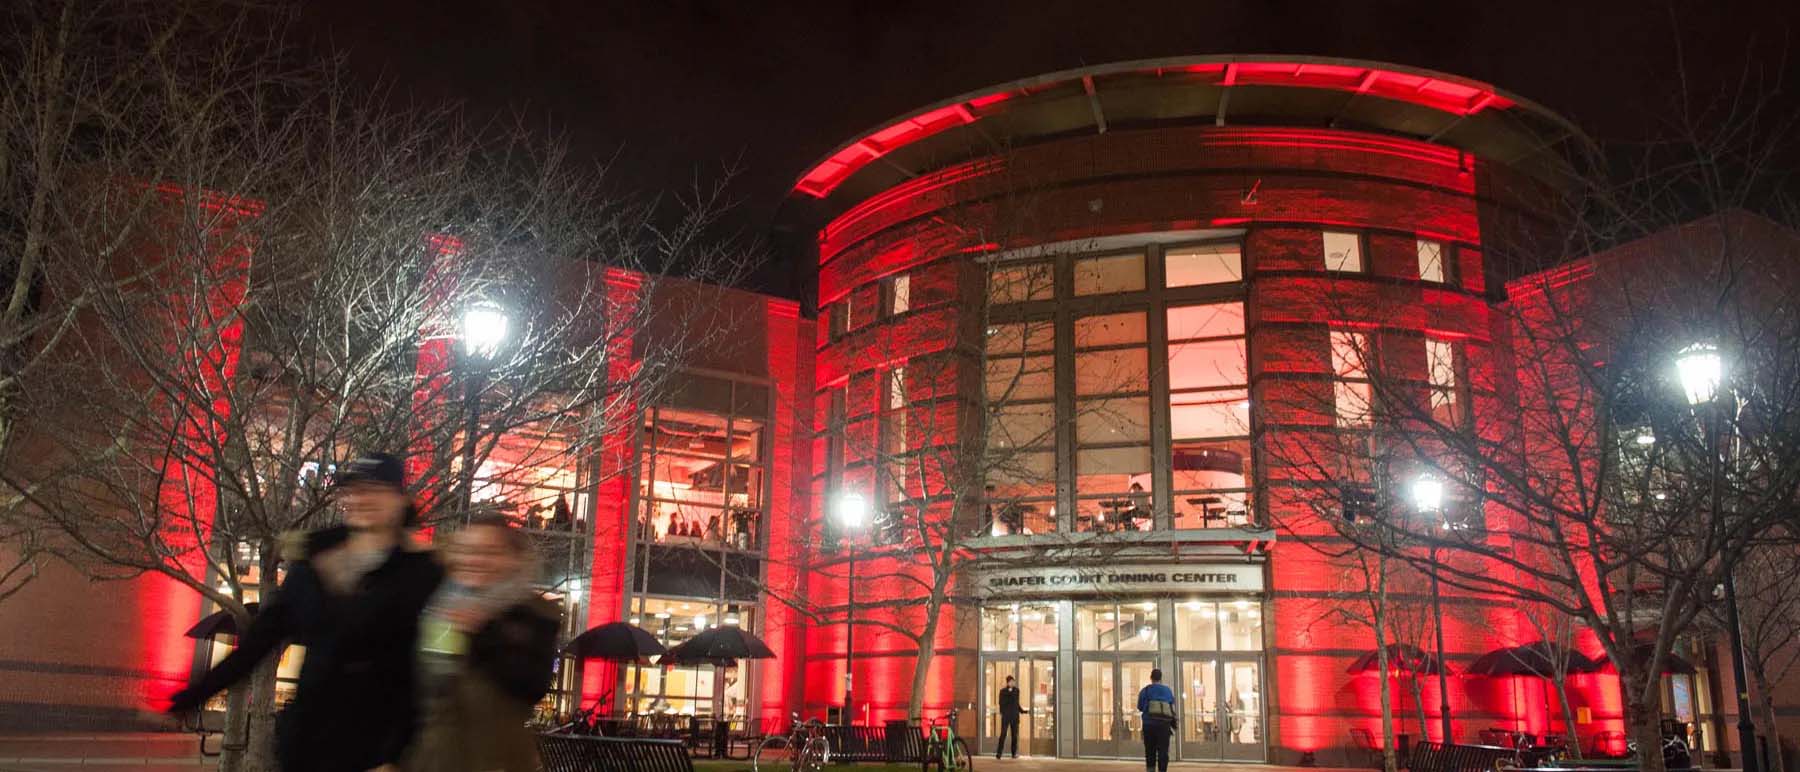 v.c.u. shafer court dining center at night lit up by a red light in celebration of chinese new years